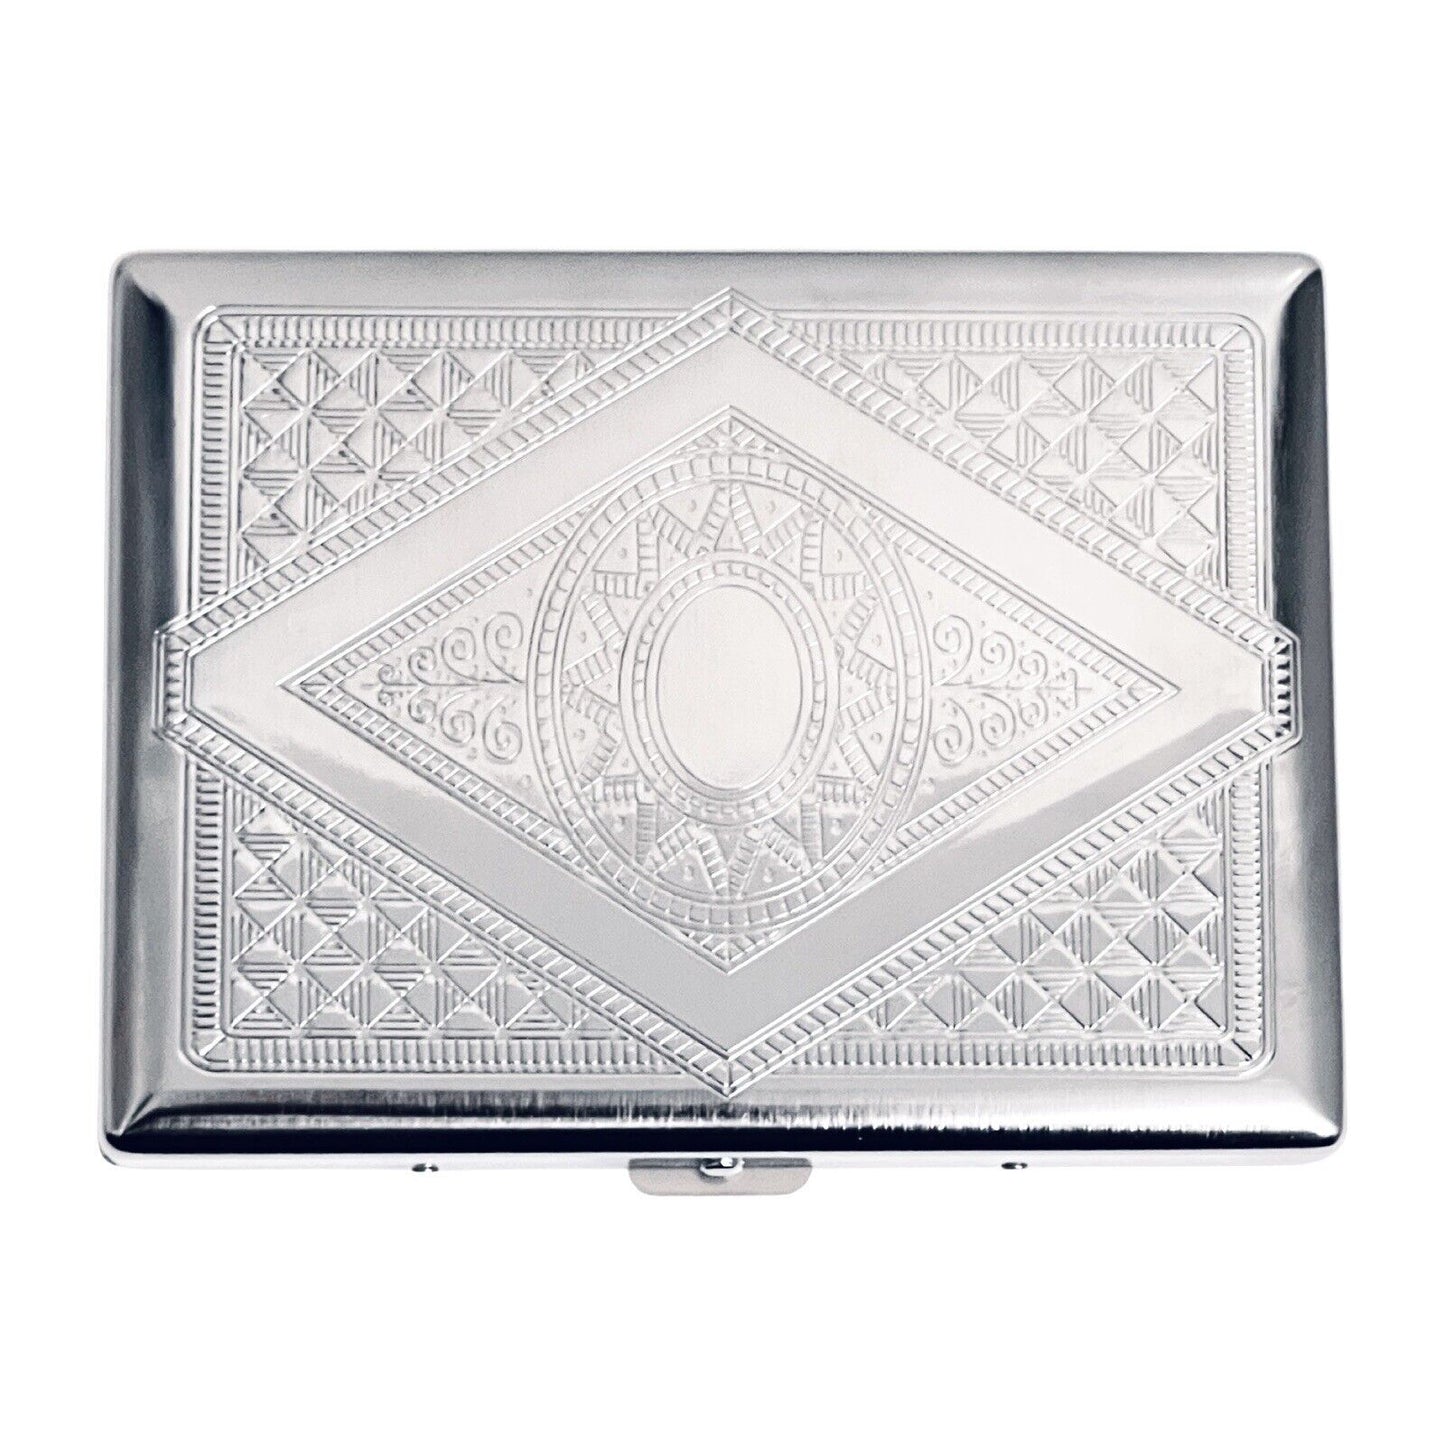 Victorian Style Metal Cigarette Case Crush Proof Holds King 100s Diamond Pattern